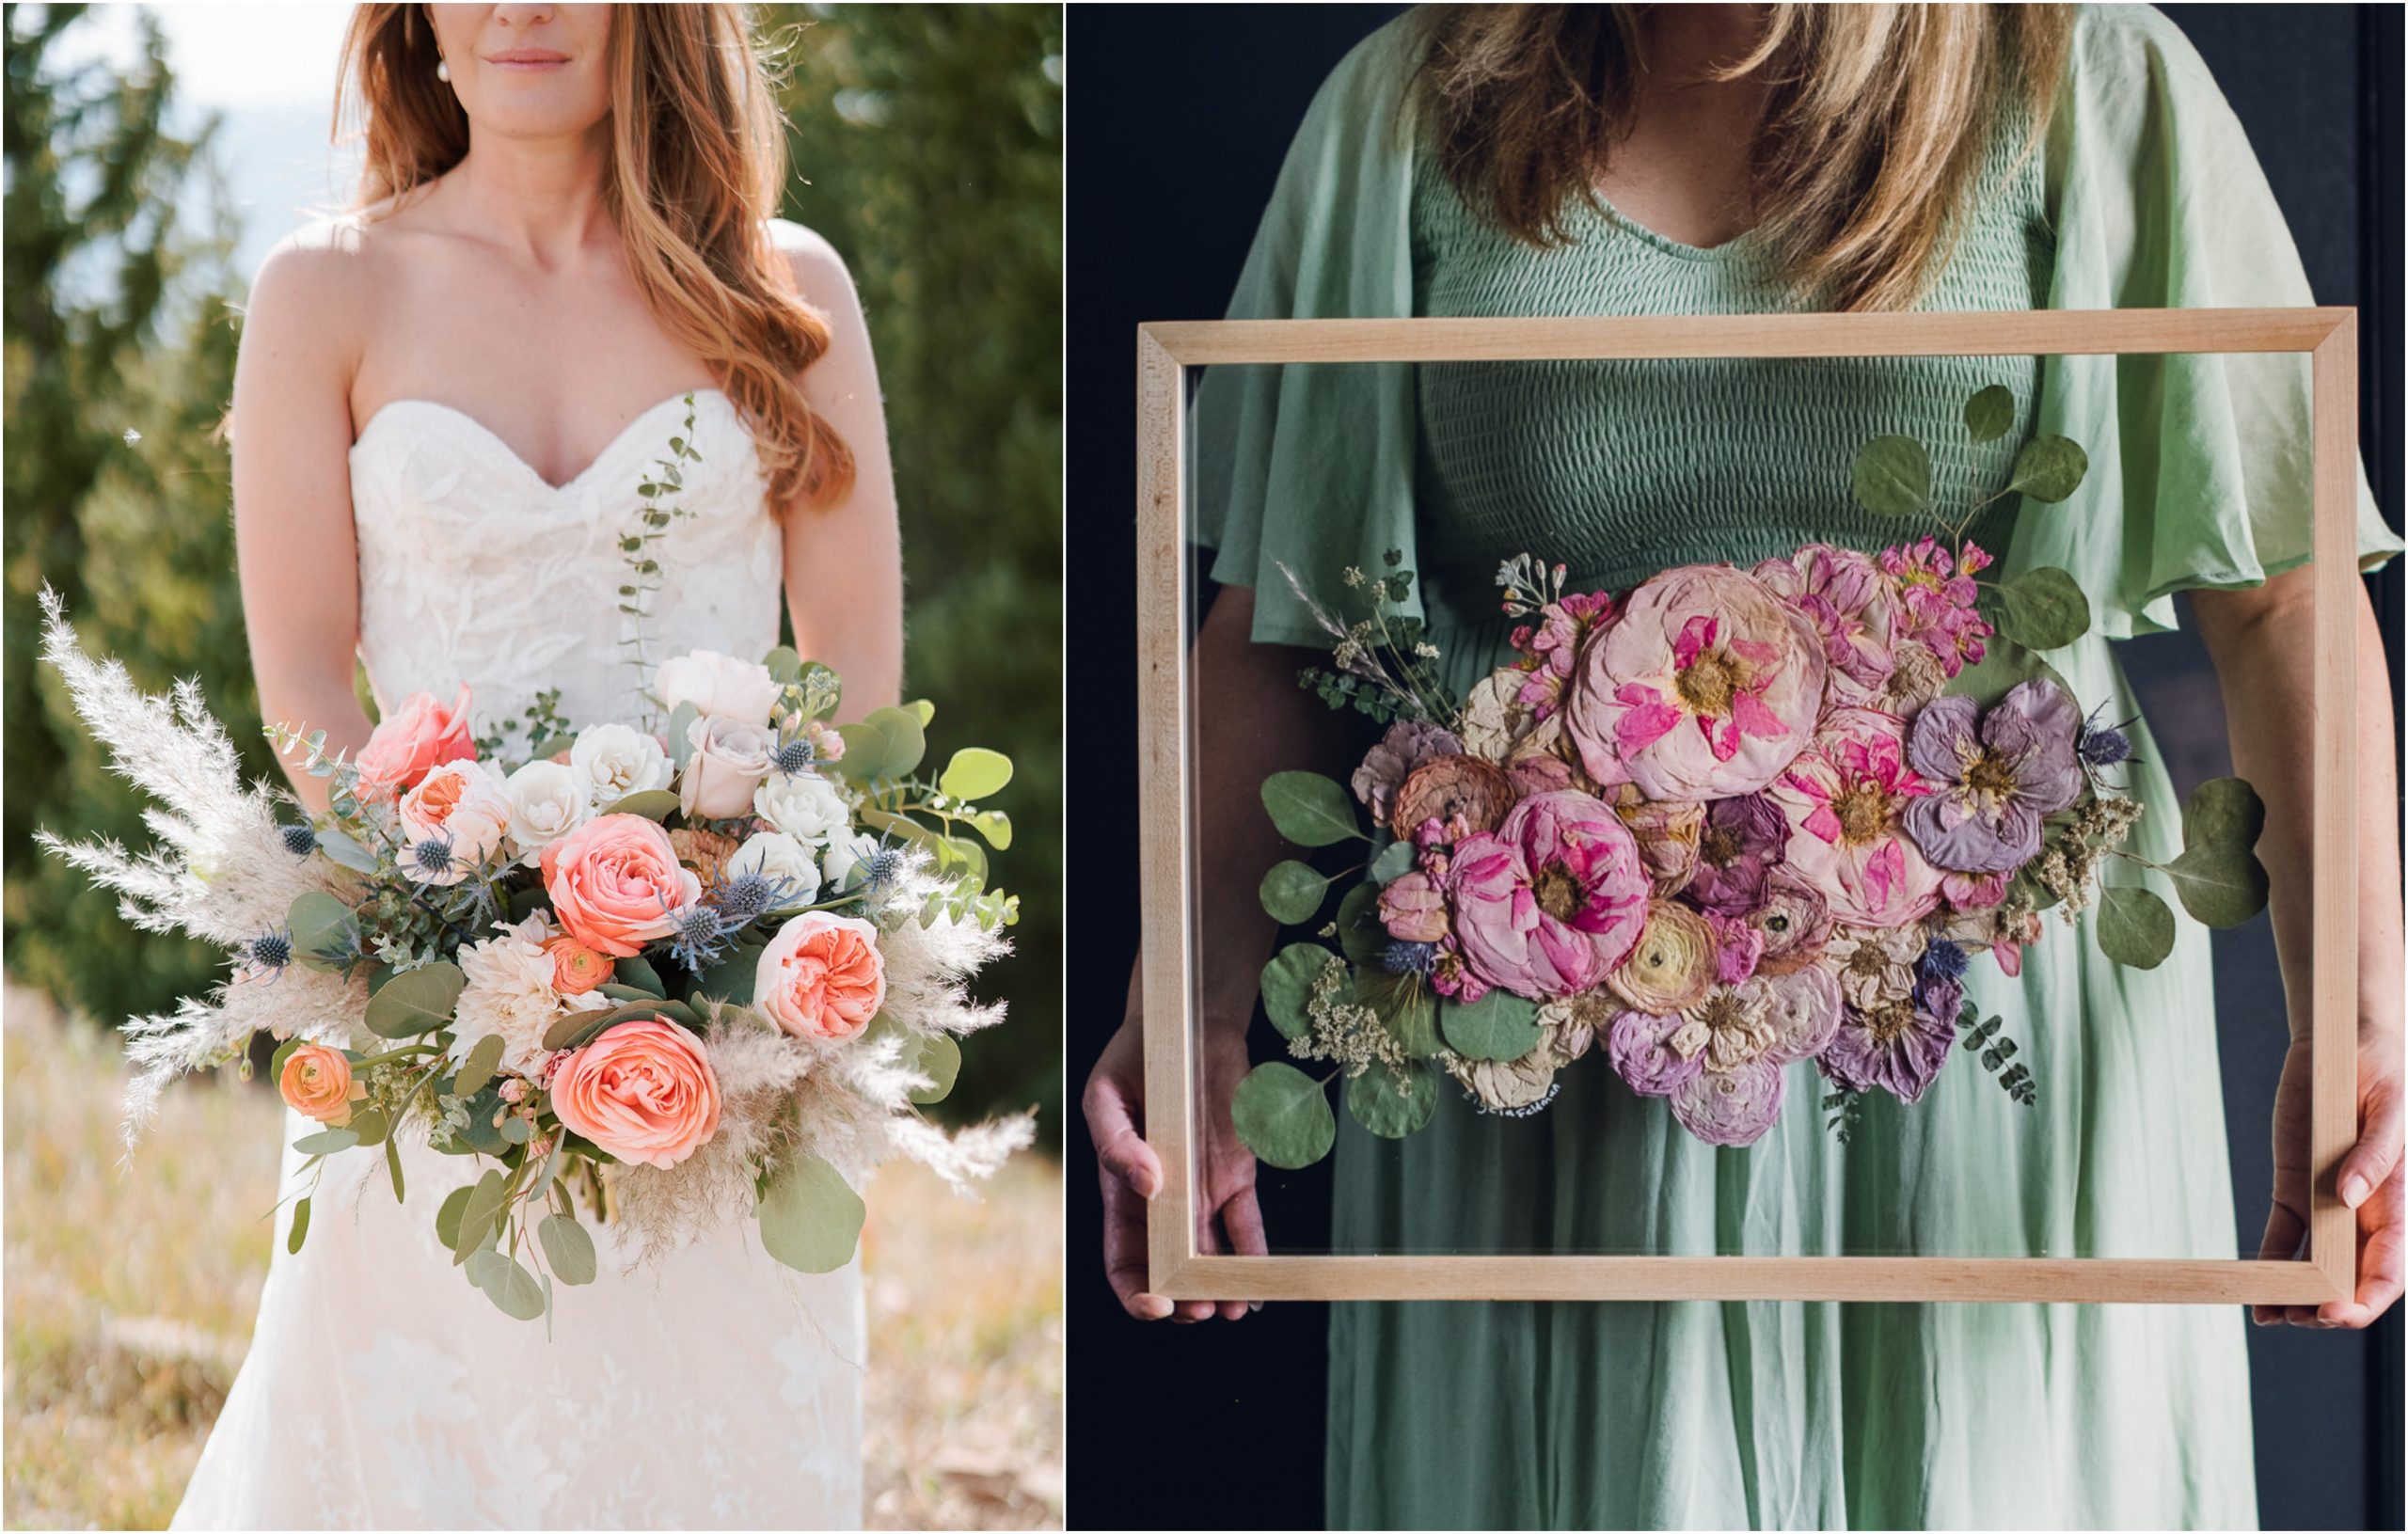 before and after of bridal bouquet preservation turned into art